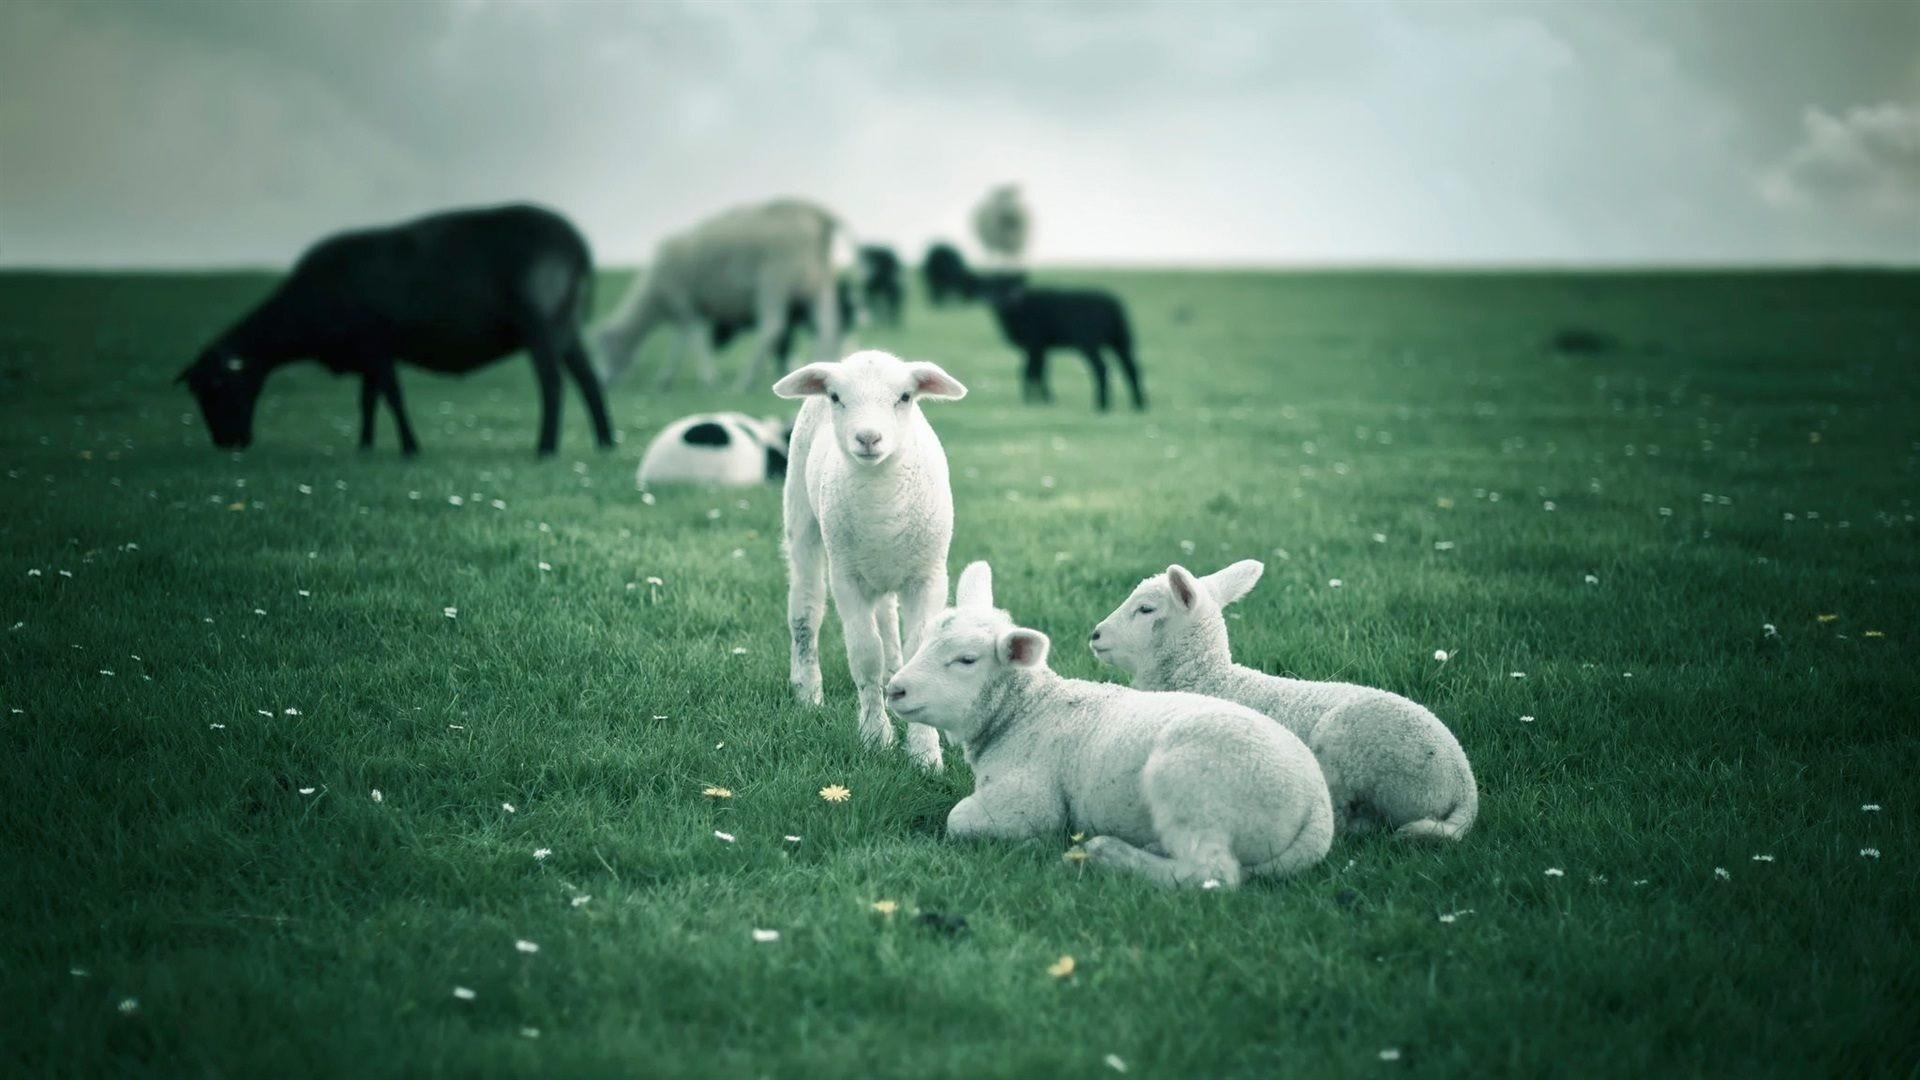 Sheep Wallpaper background picture